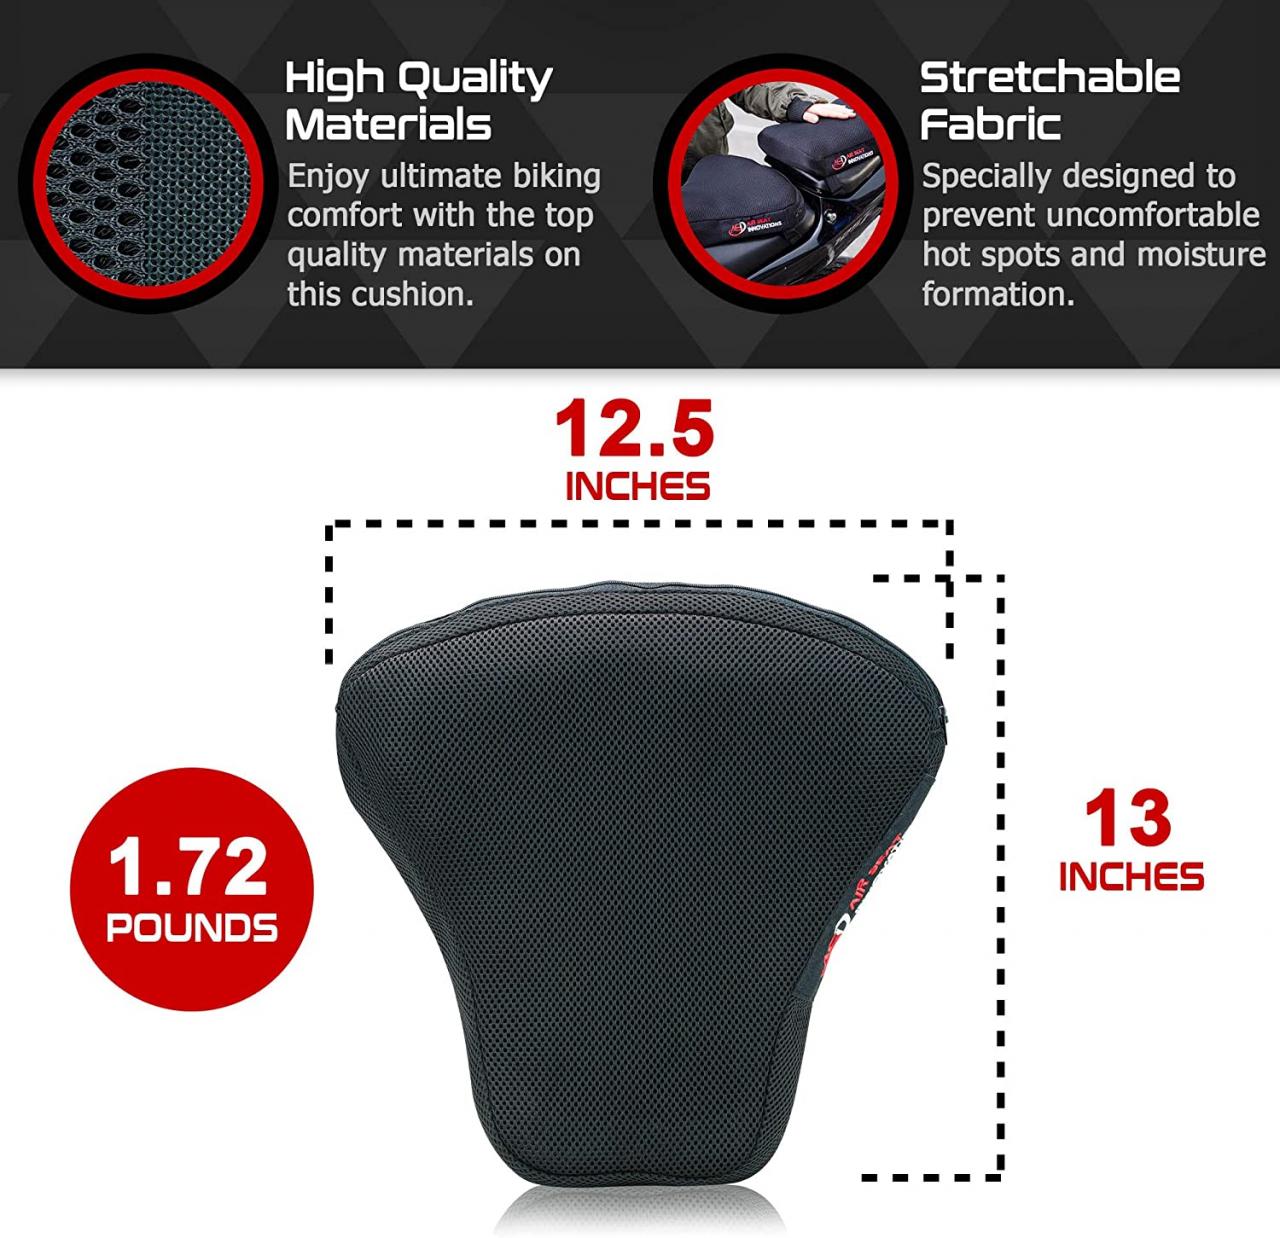 Air Seat Innovations Air Motorcycle Seat Cushion Pressure Relief Pad Medium  for Sport | Cruiser | Touring Saddles 13